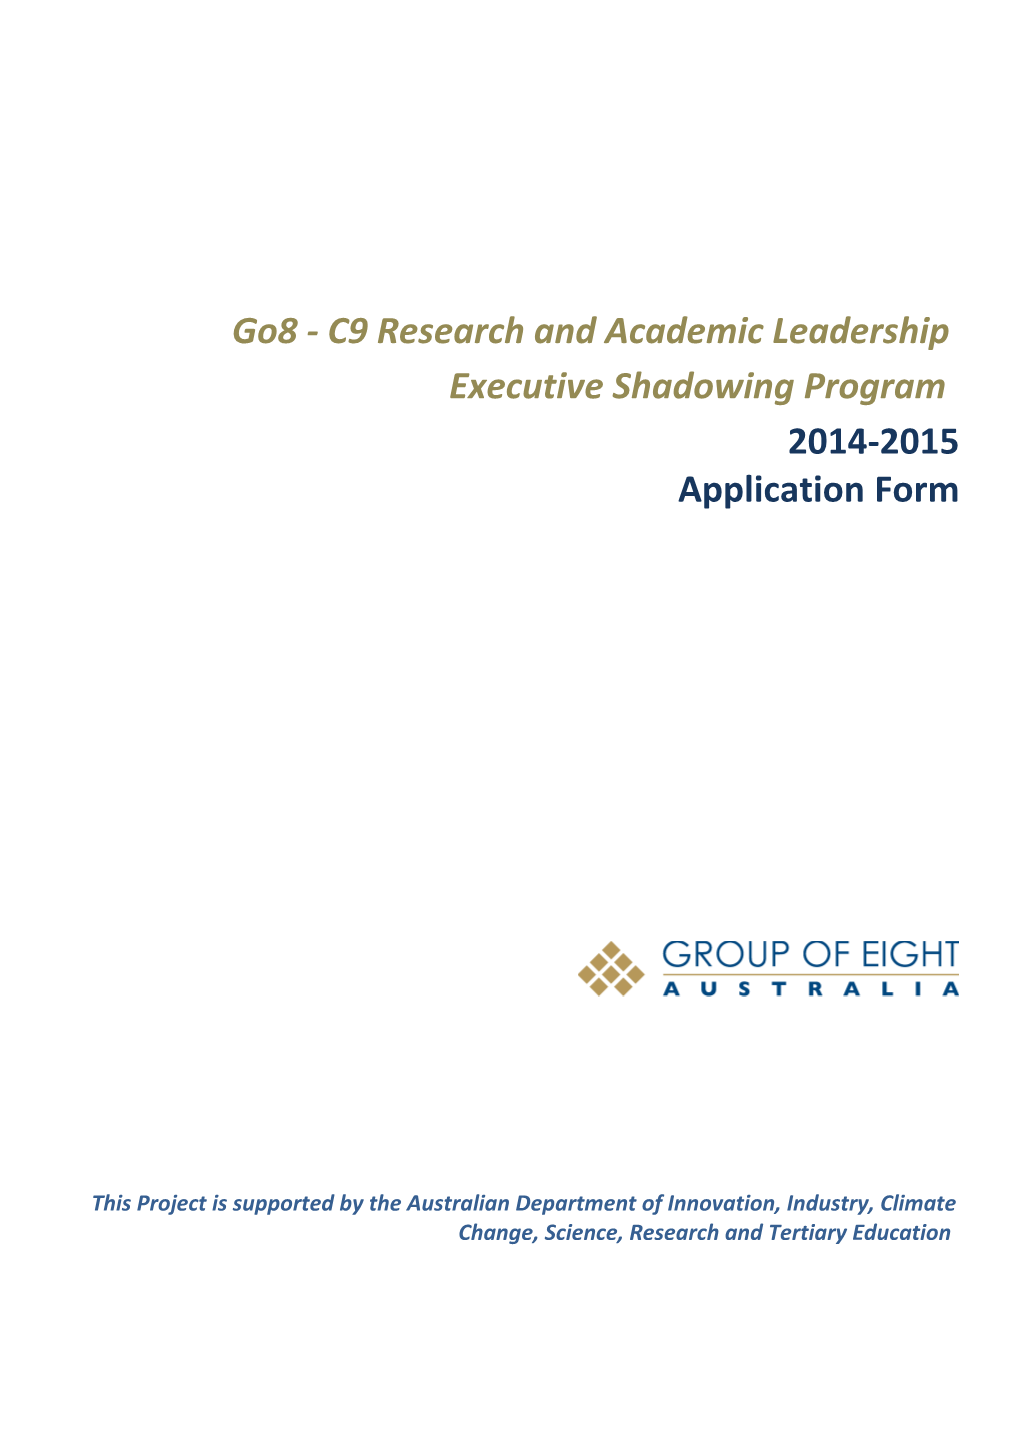 Go8 - C9 Research and Academic Leadership Executive Shadowing Program